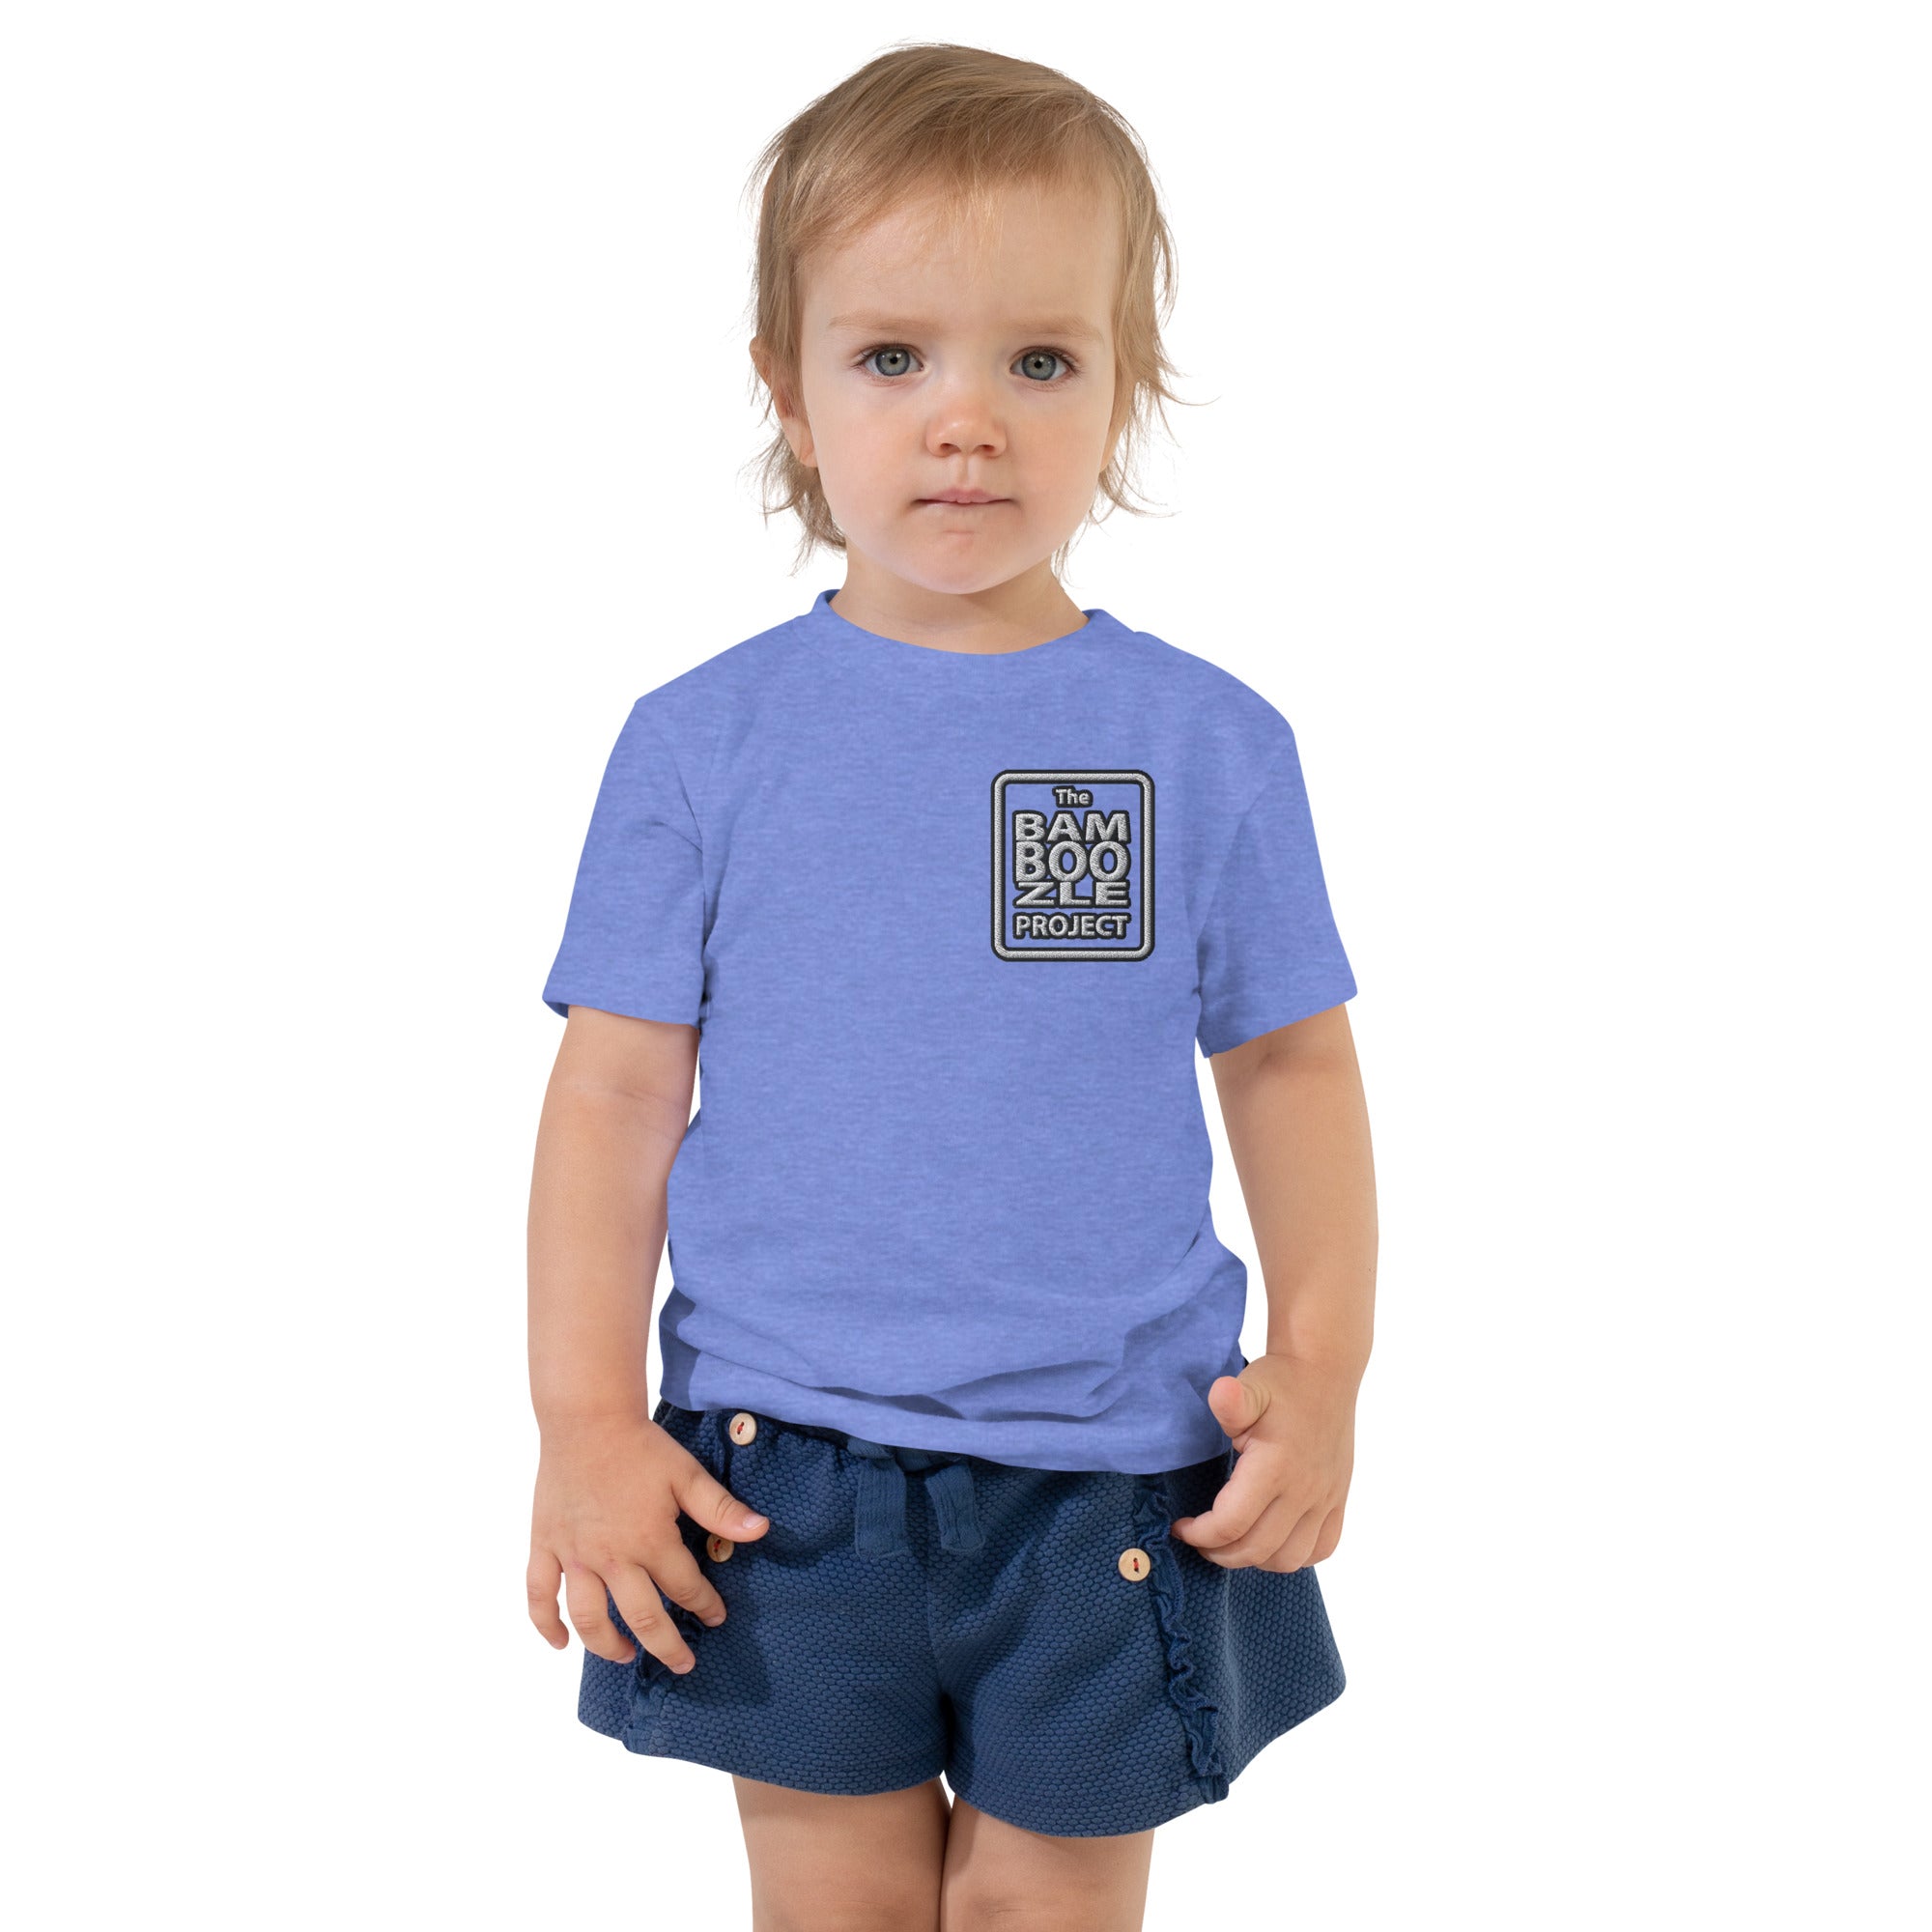 Bamboozle Force Embroidered Toddler Tee